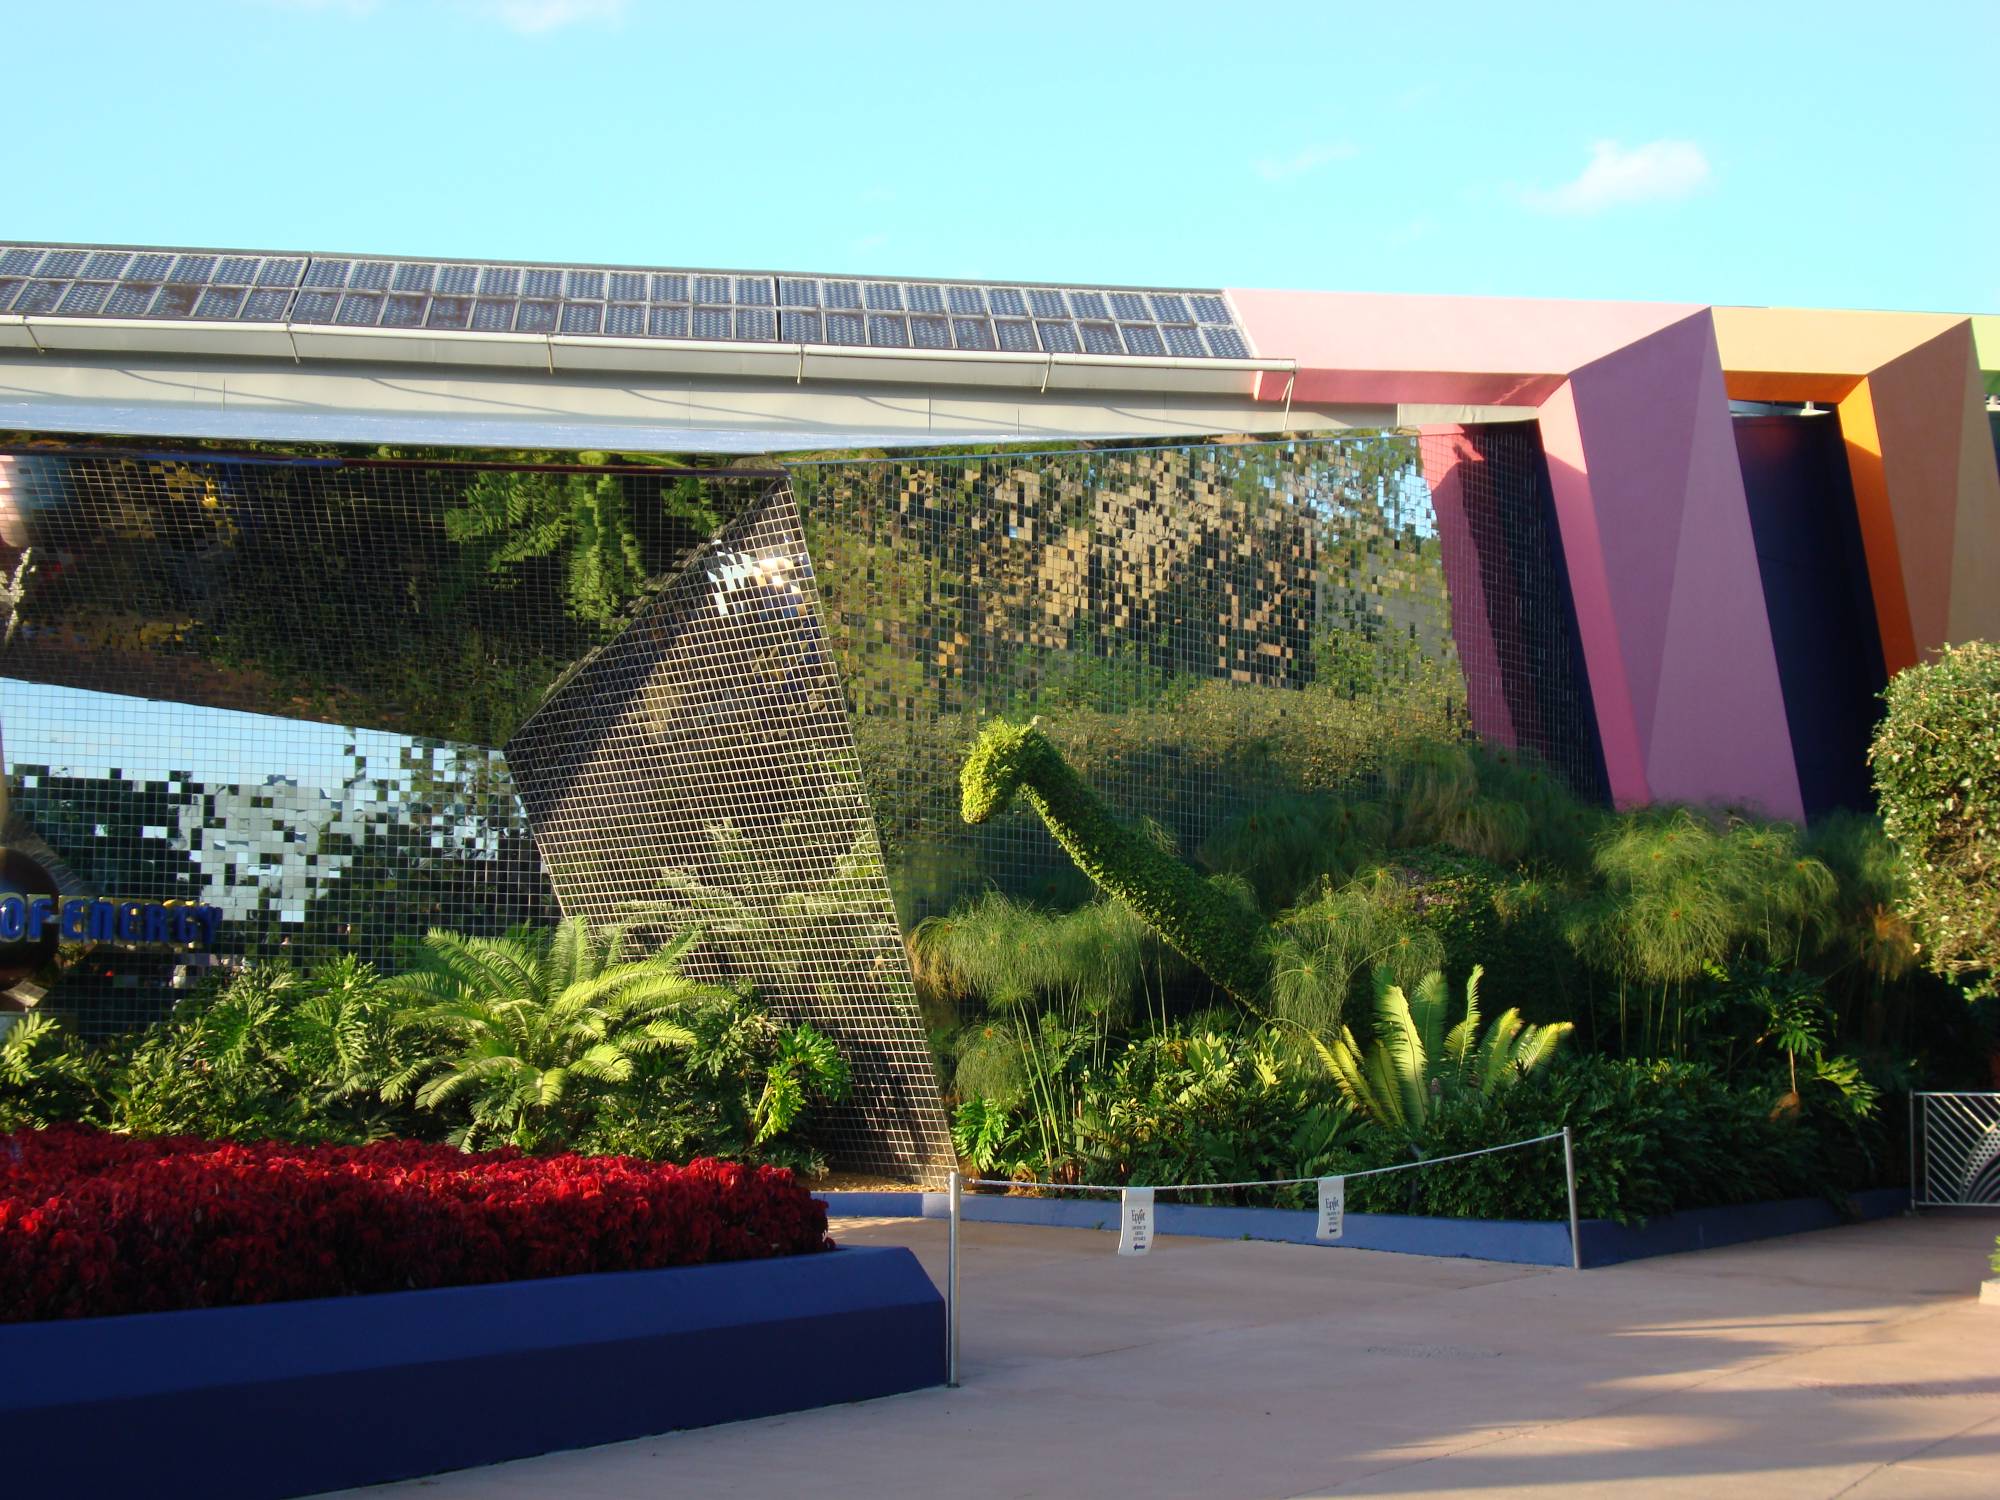 Discover the often overlooked attractions at Epcot | PassPorter.com